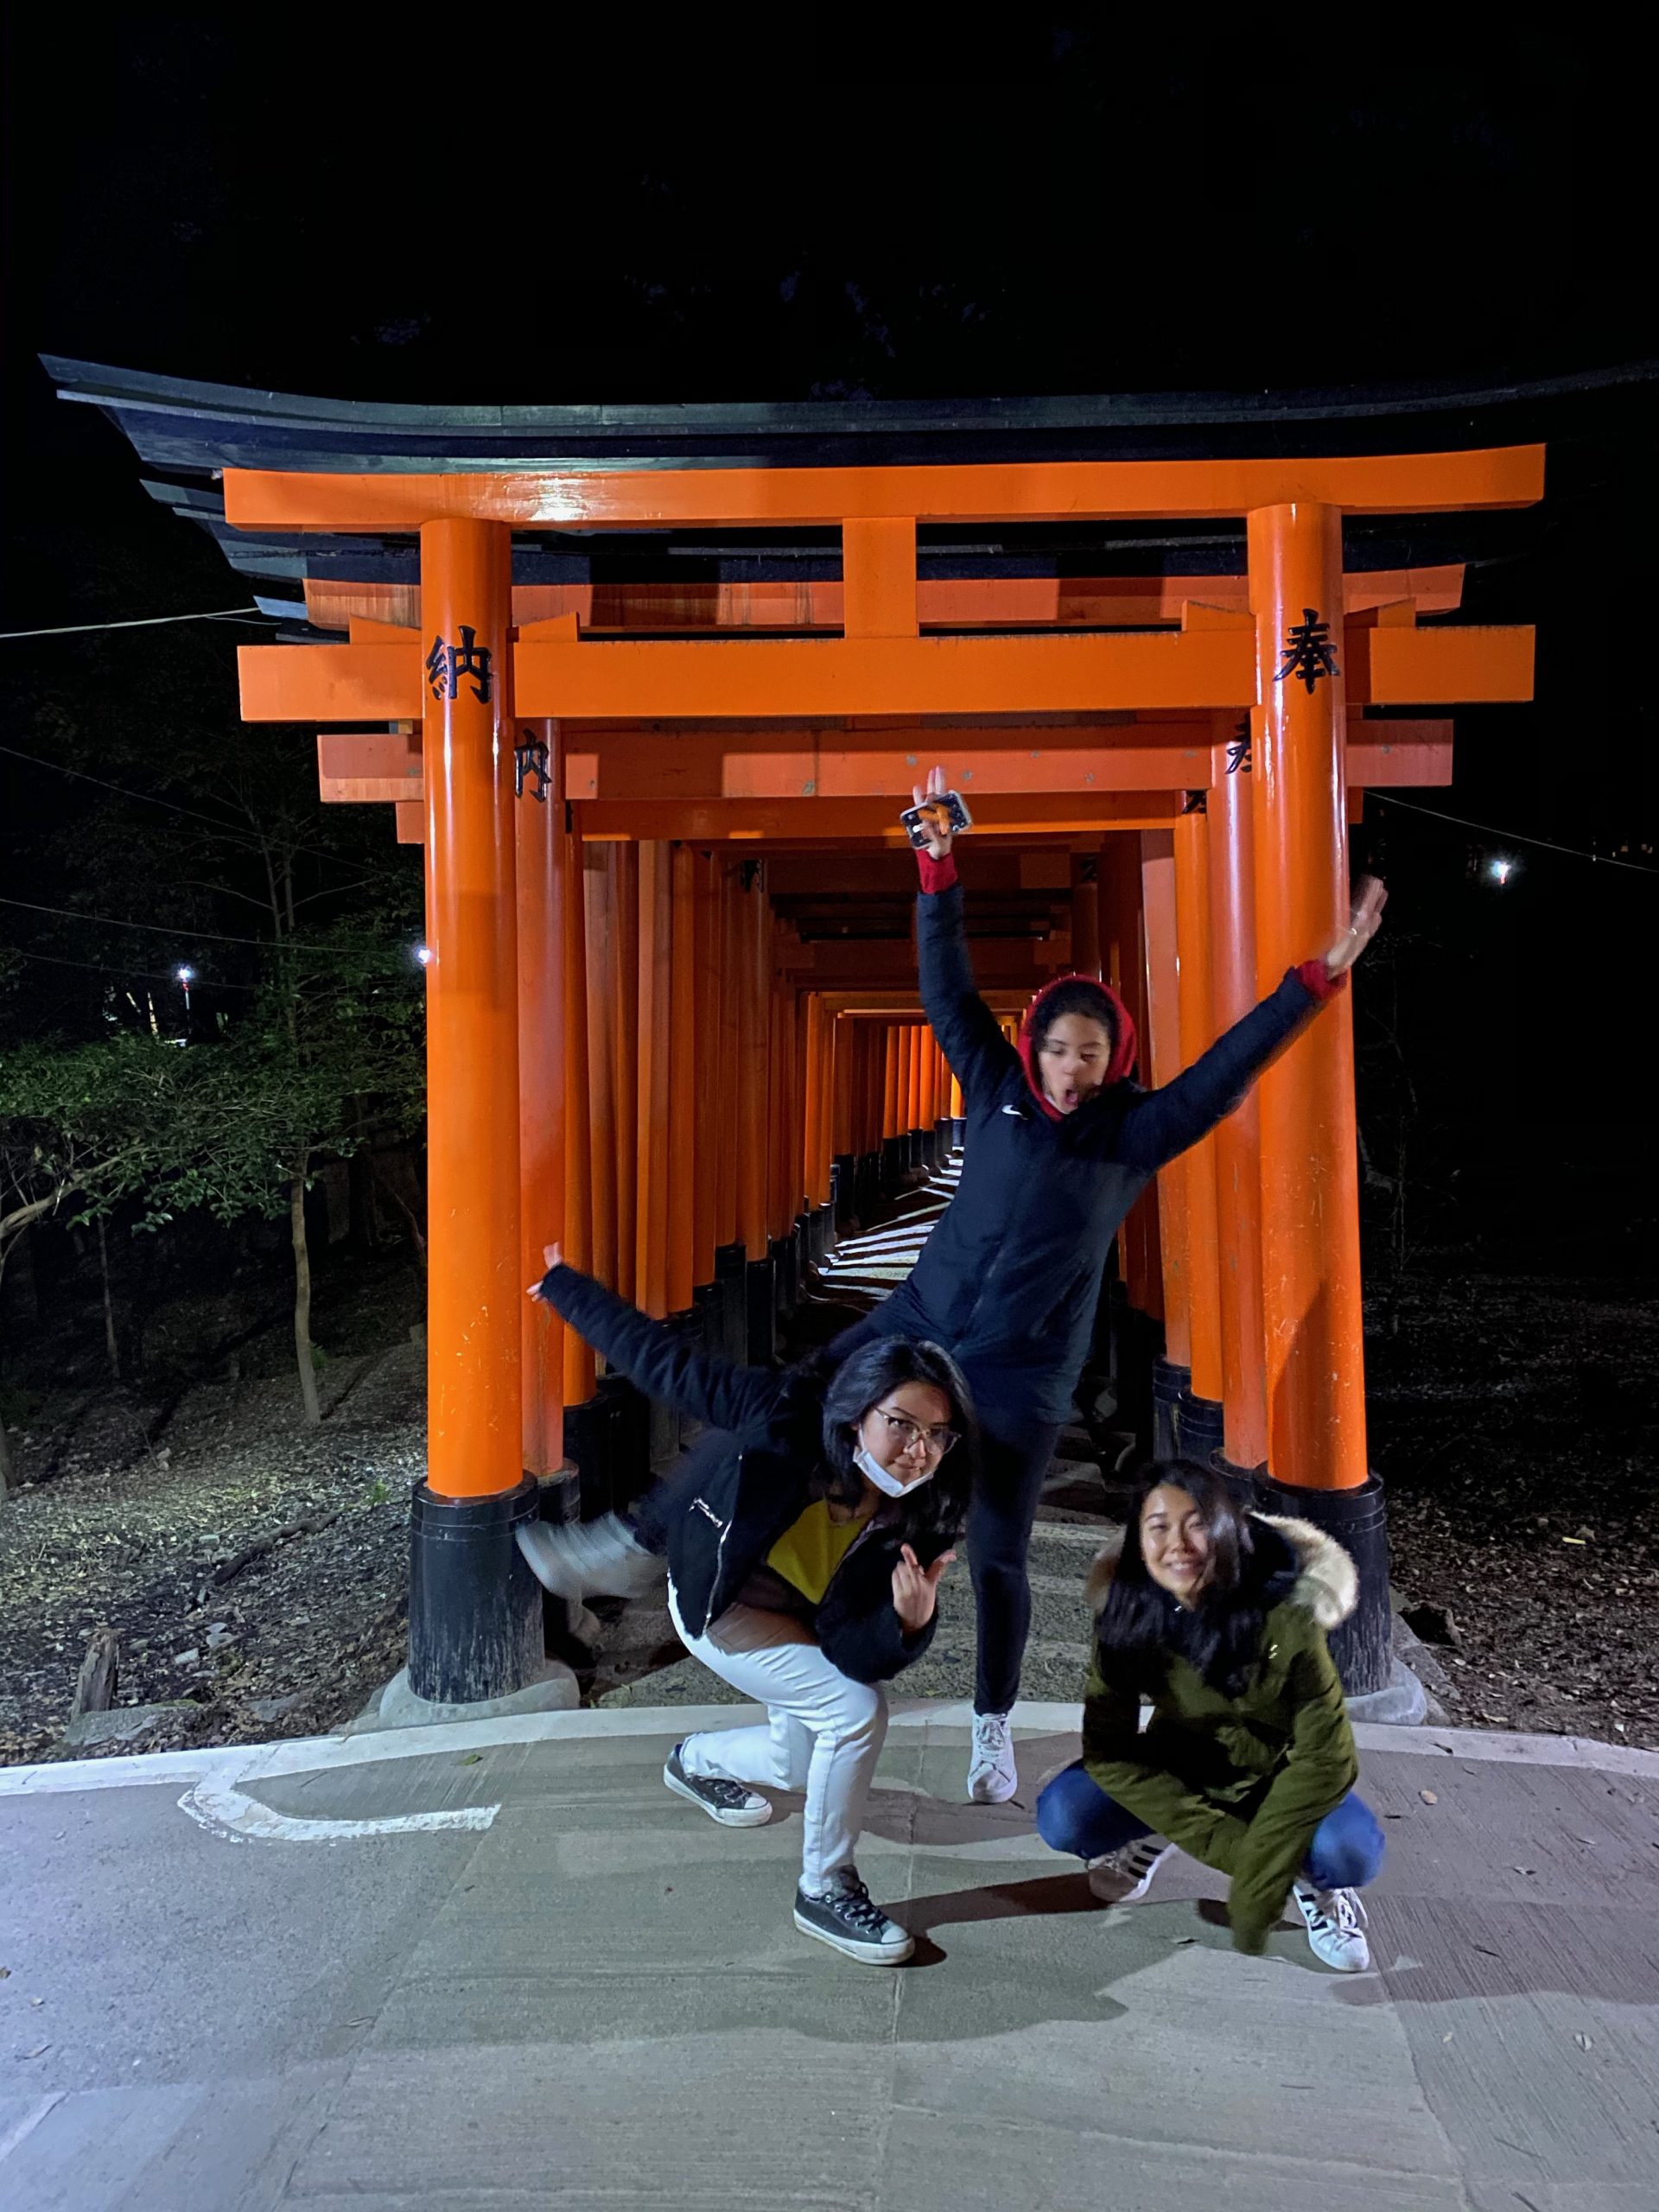 Isis, Emi, and Marina doing a silly pose in front of orange and black arches